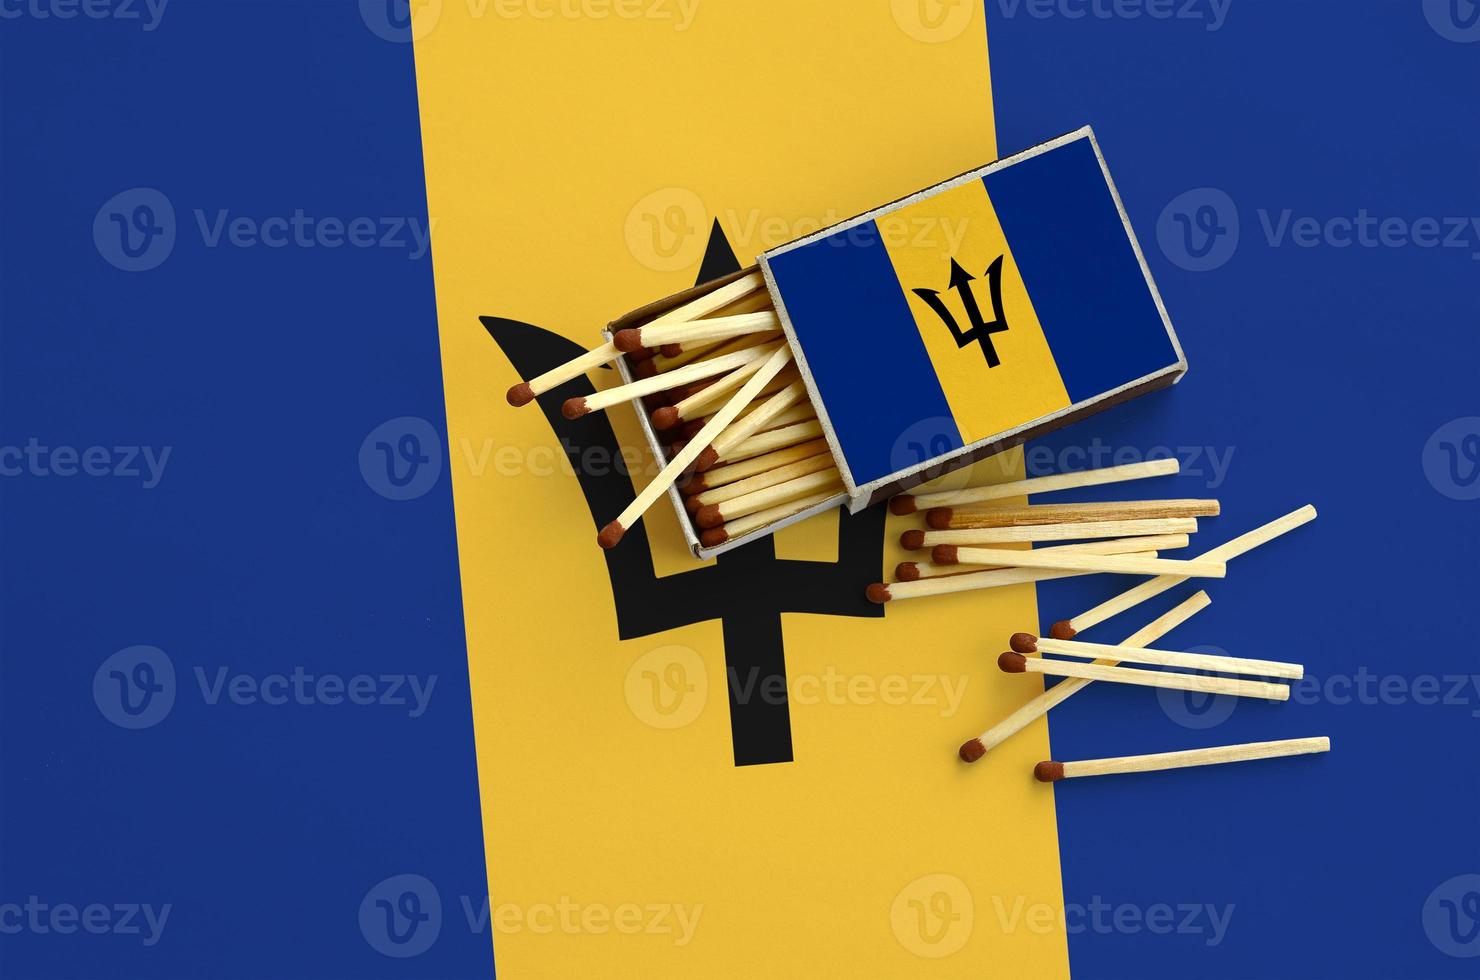 Barbados flag is shown on an open matchbox, from which several matches fall and lies on a large flag photo